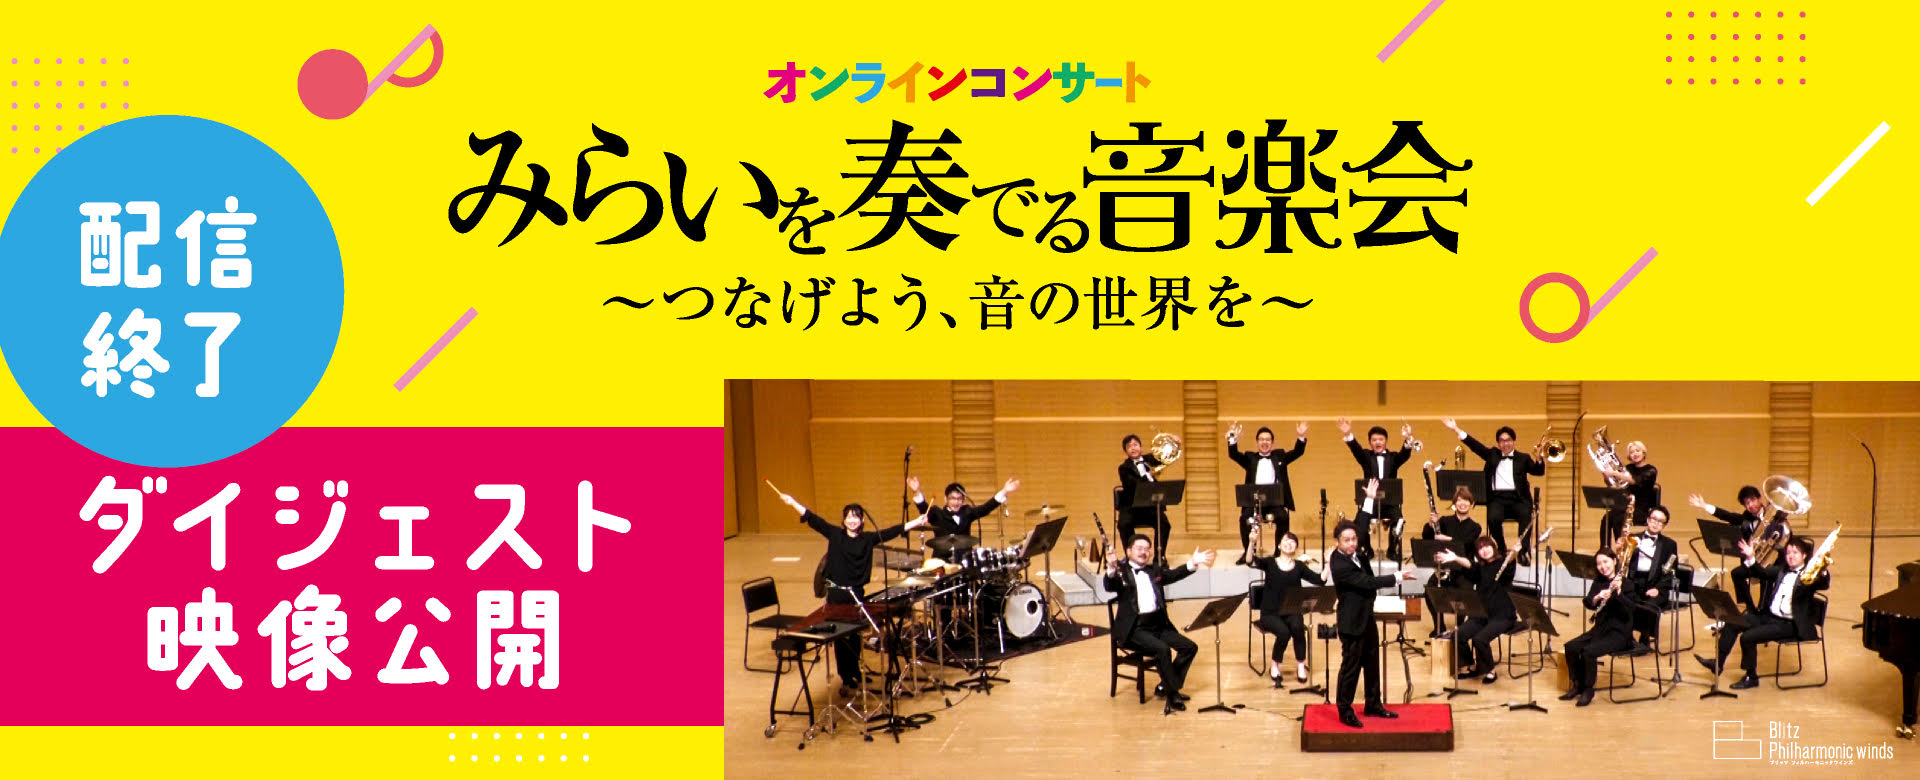 Idemitsu Music Events “Performing the future”